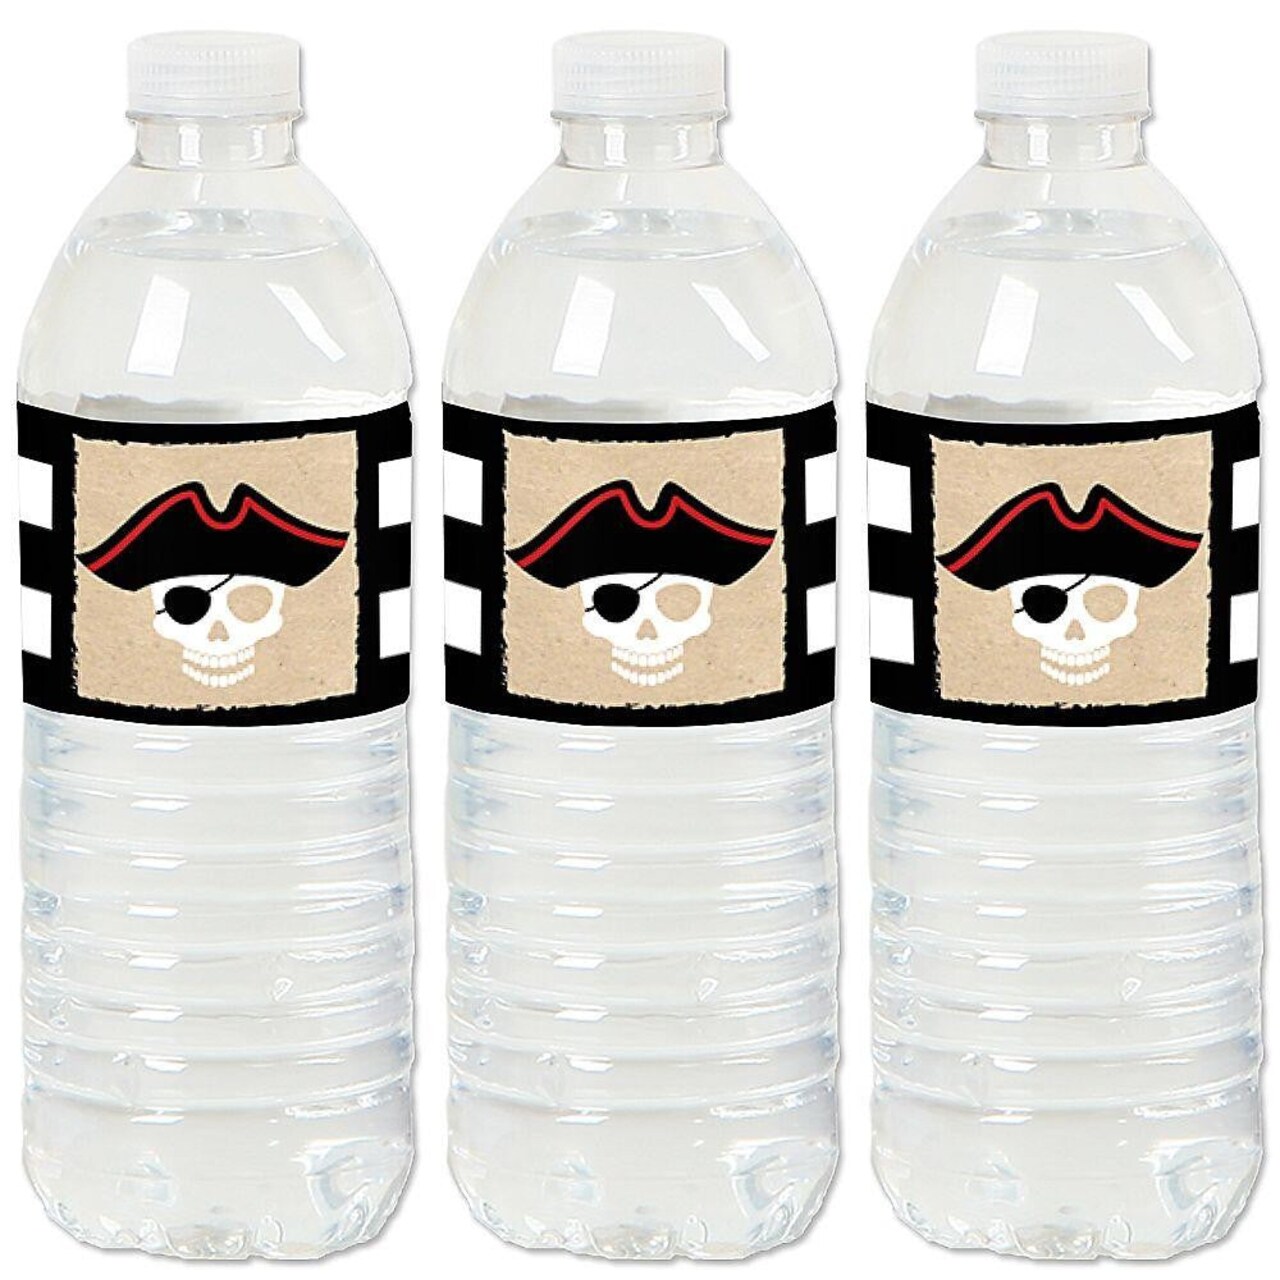 Big Dot of Happiness Beware of Pirates - Pirate Birthday Party Water Bottle Sticker Labels - Set of 20